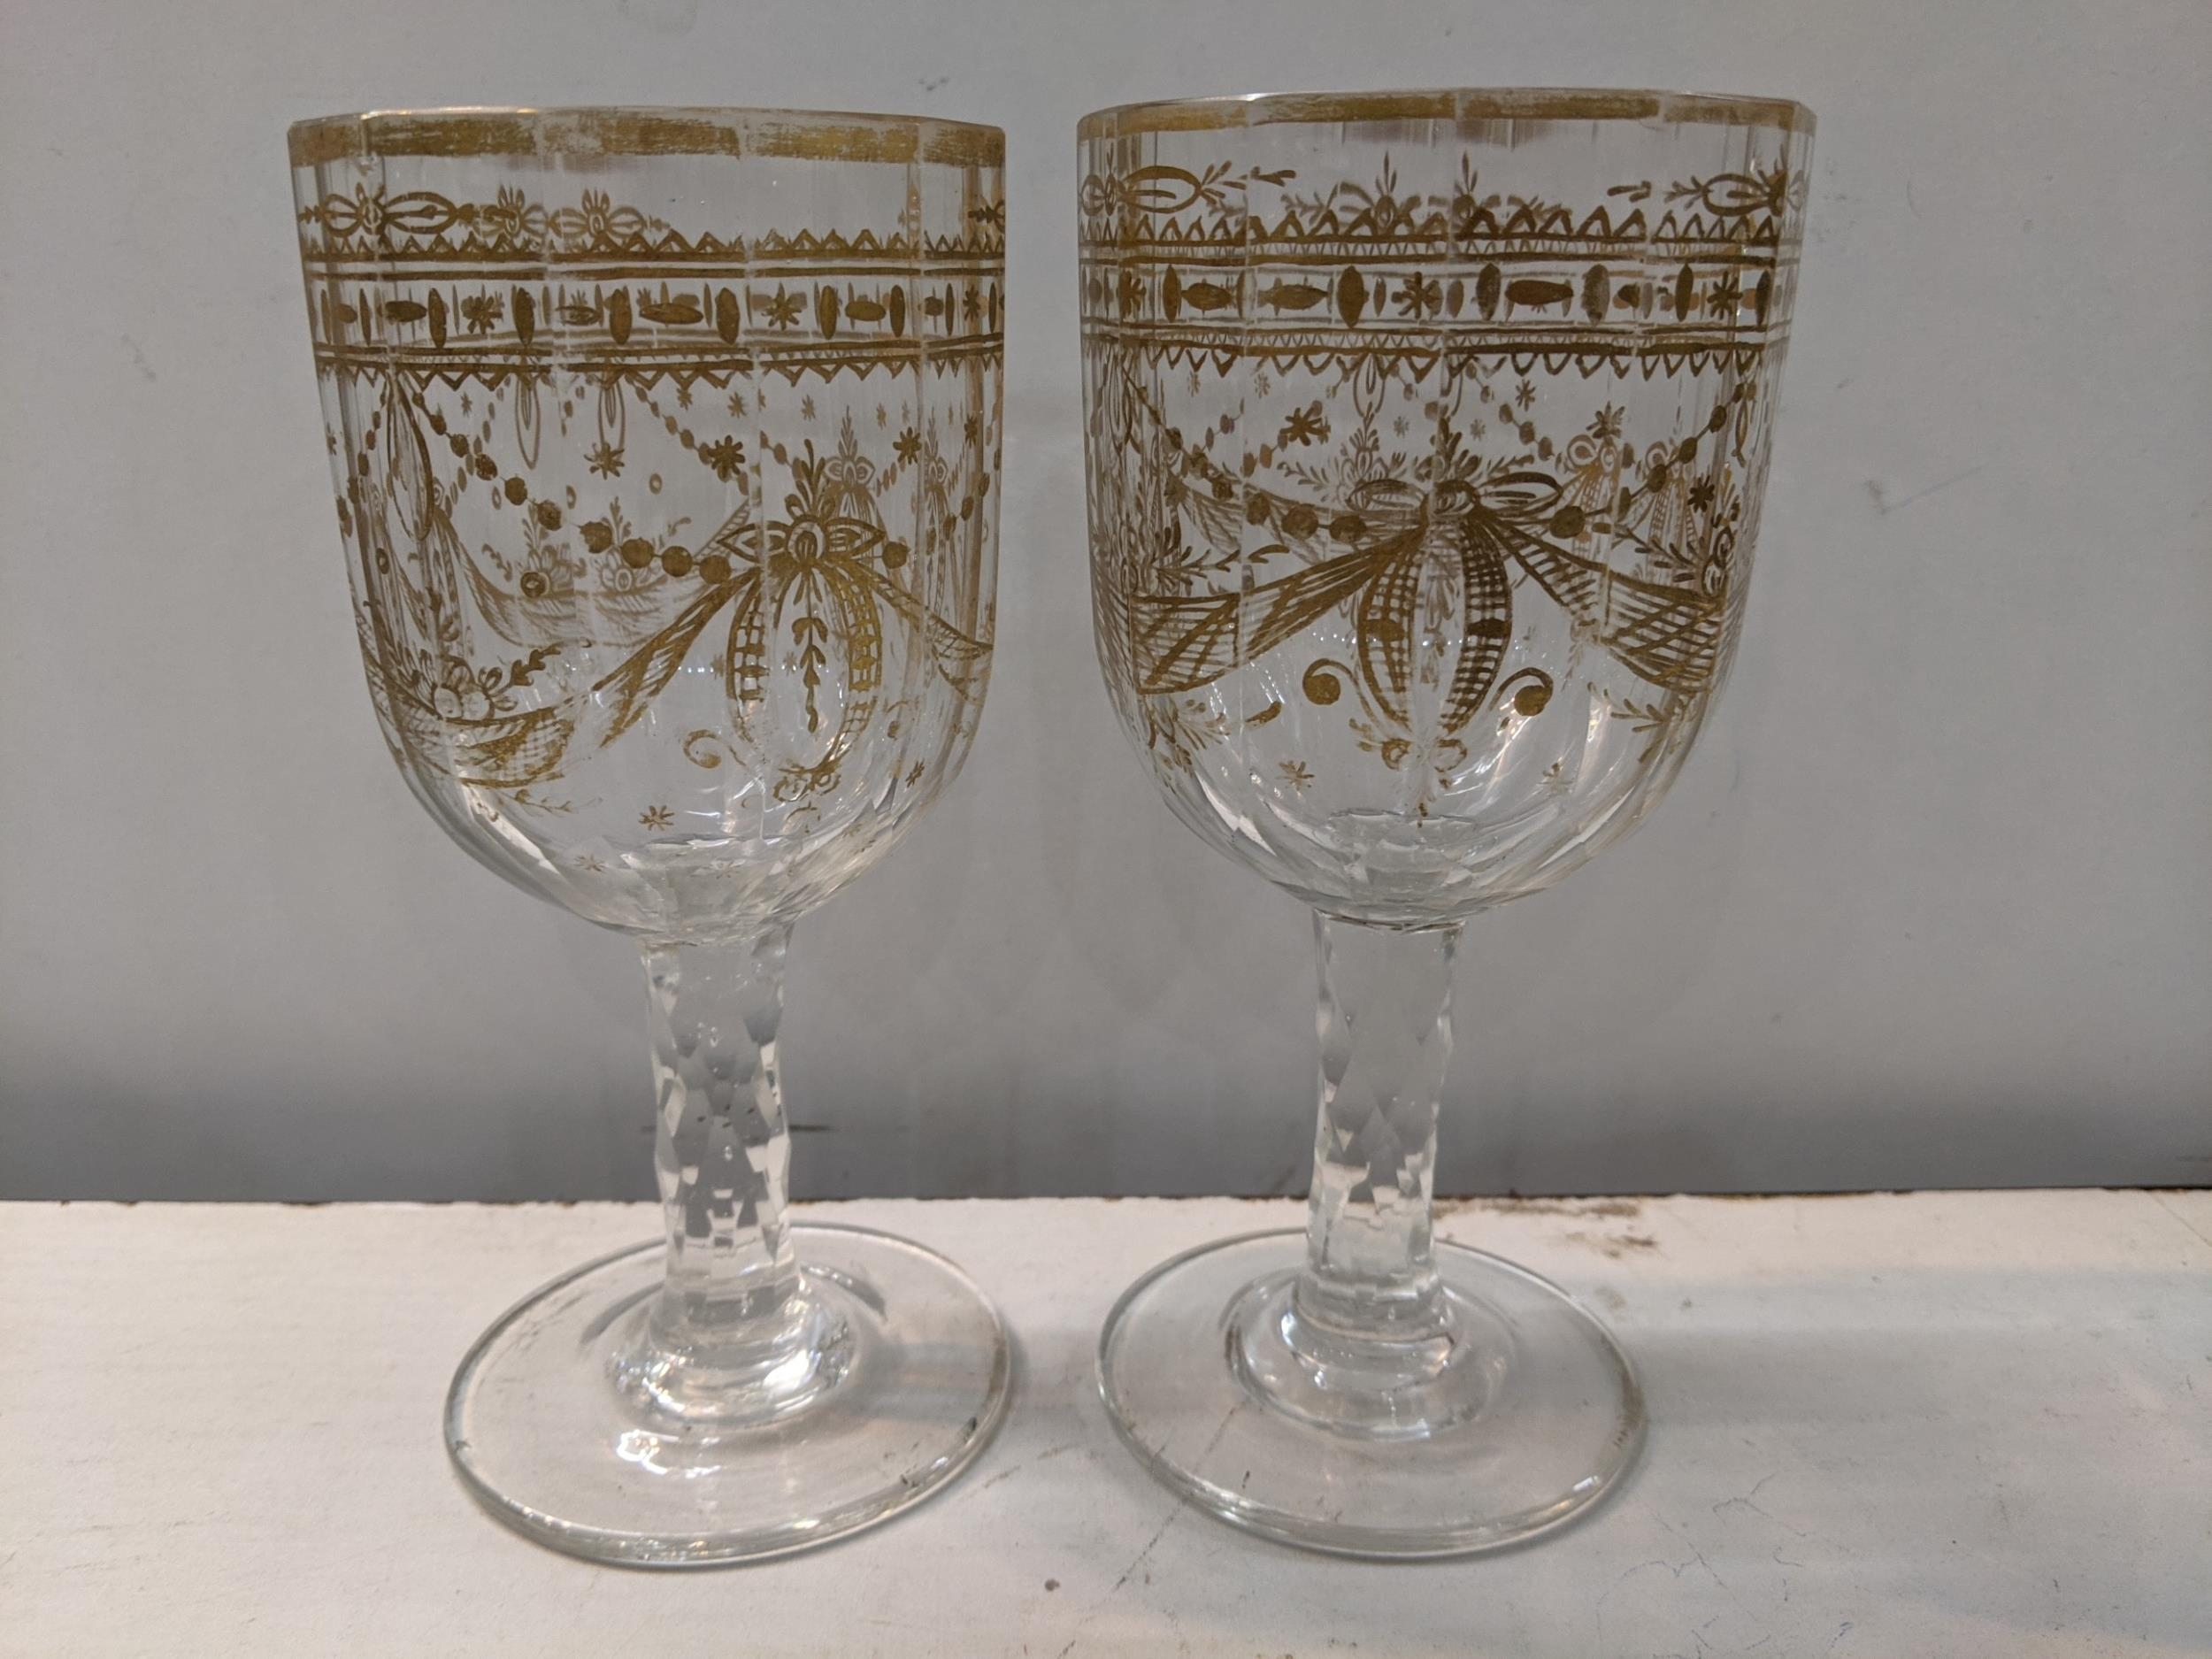 A pair of late 18th/early 19th century gilded wine glasses in the neo classical design and having